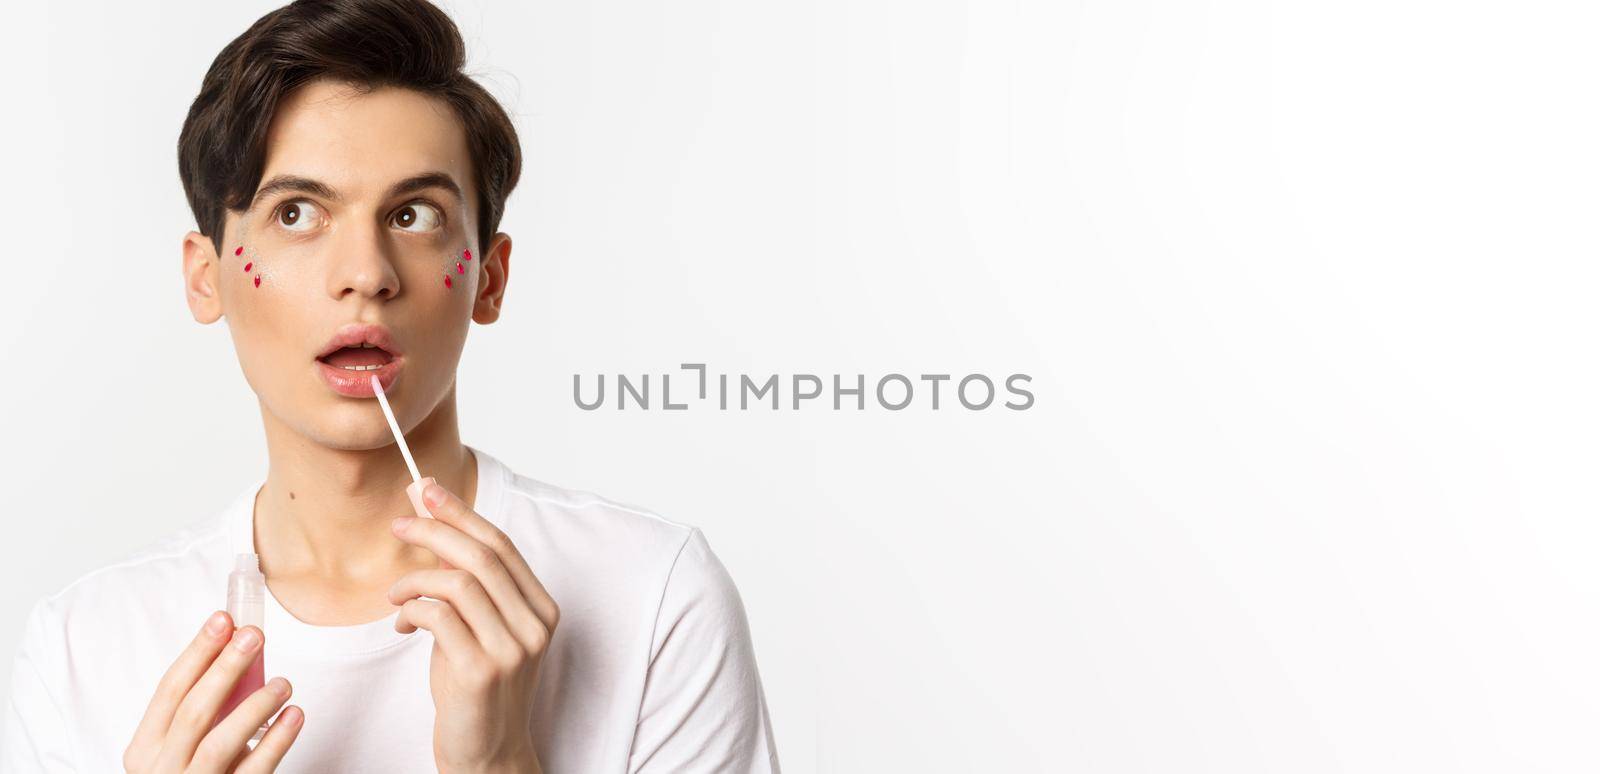 Close-up of beautiful androgynous man with glitter under eyes applying lip gloss, looking dreamy at upper left corner, white background.